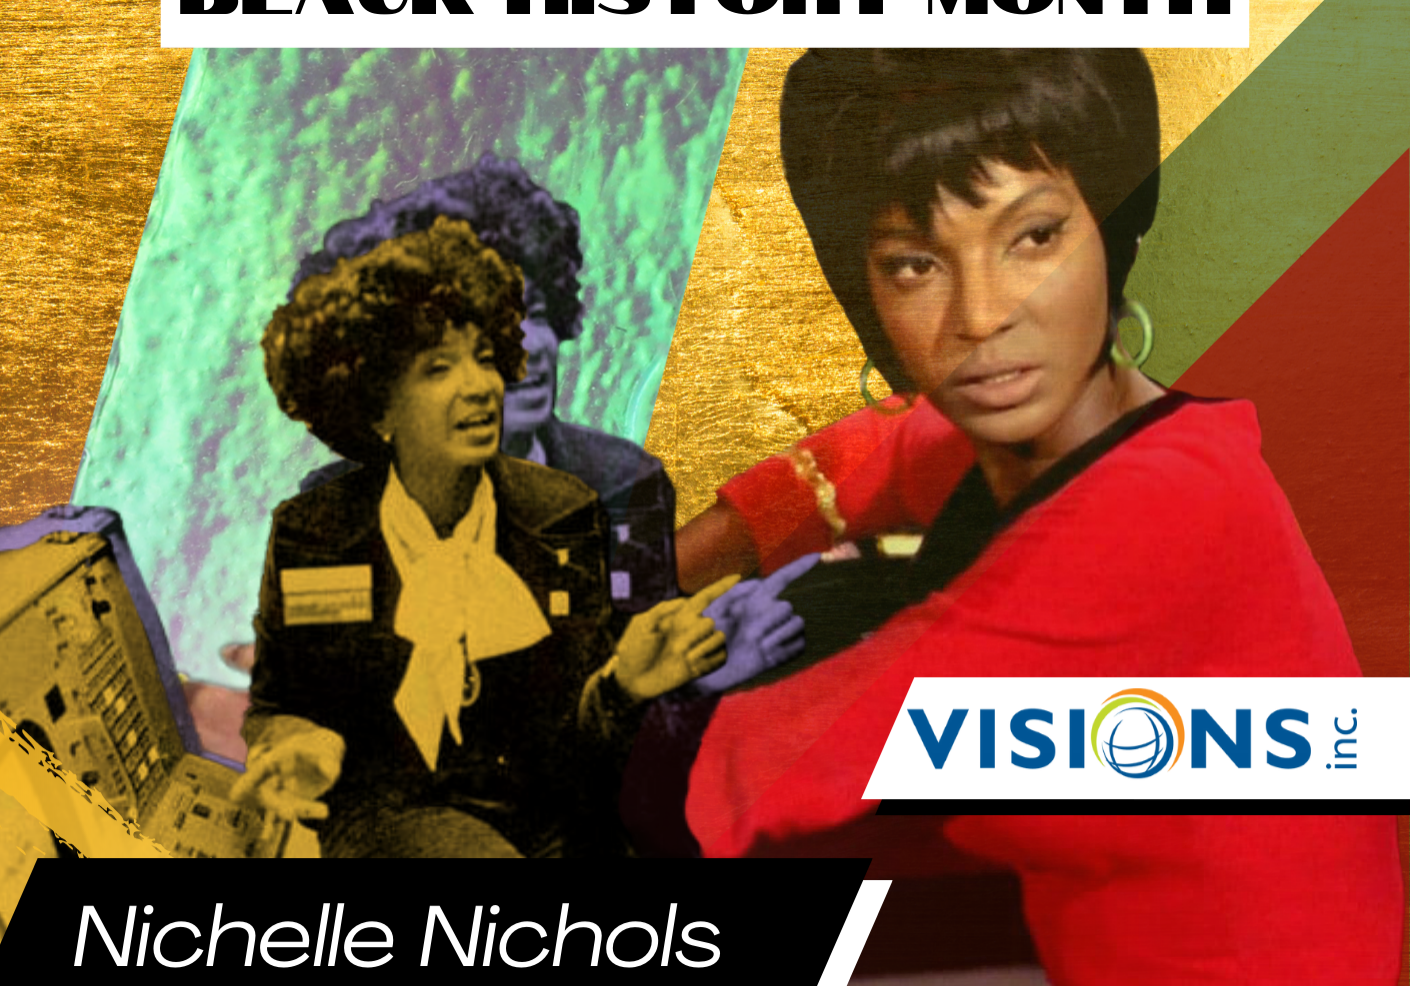 Colorful collage featuring two photos of Nichelle Nichols: (1) as Star Trek character Lt. Nyota Uhura wearing a red uniform and sitting at her station, (2) demonstrating NASA equipment for recruits.